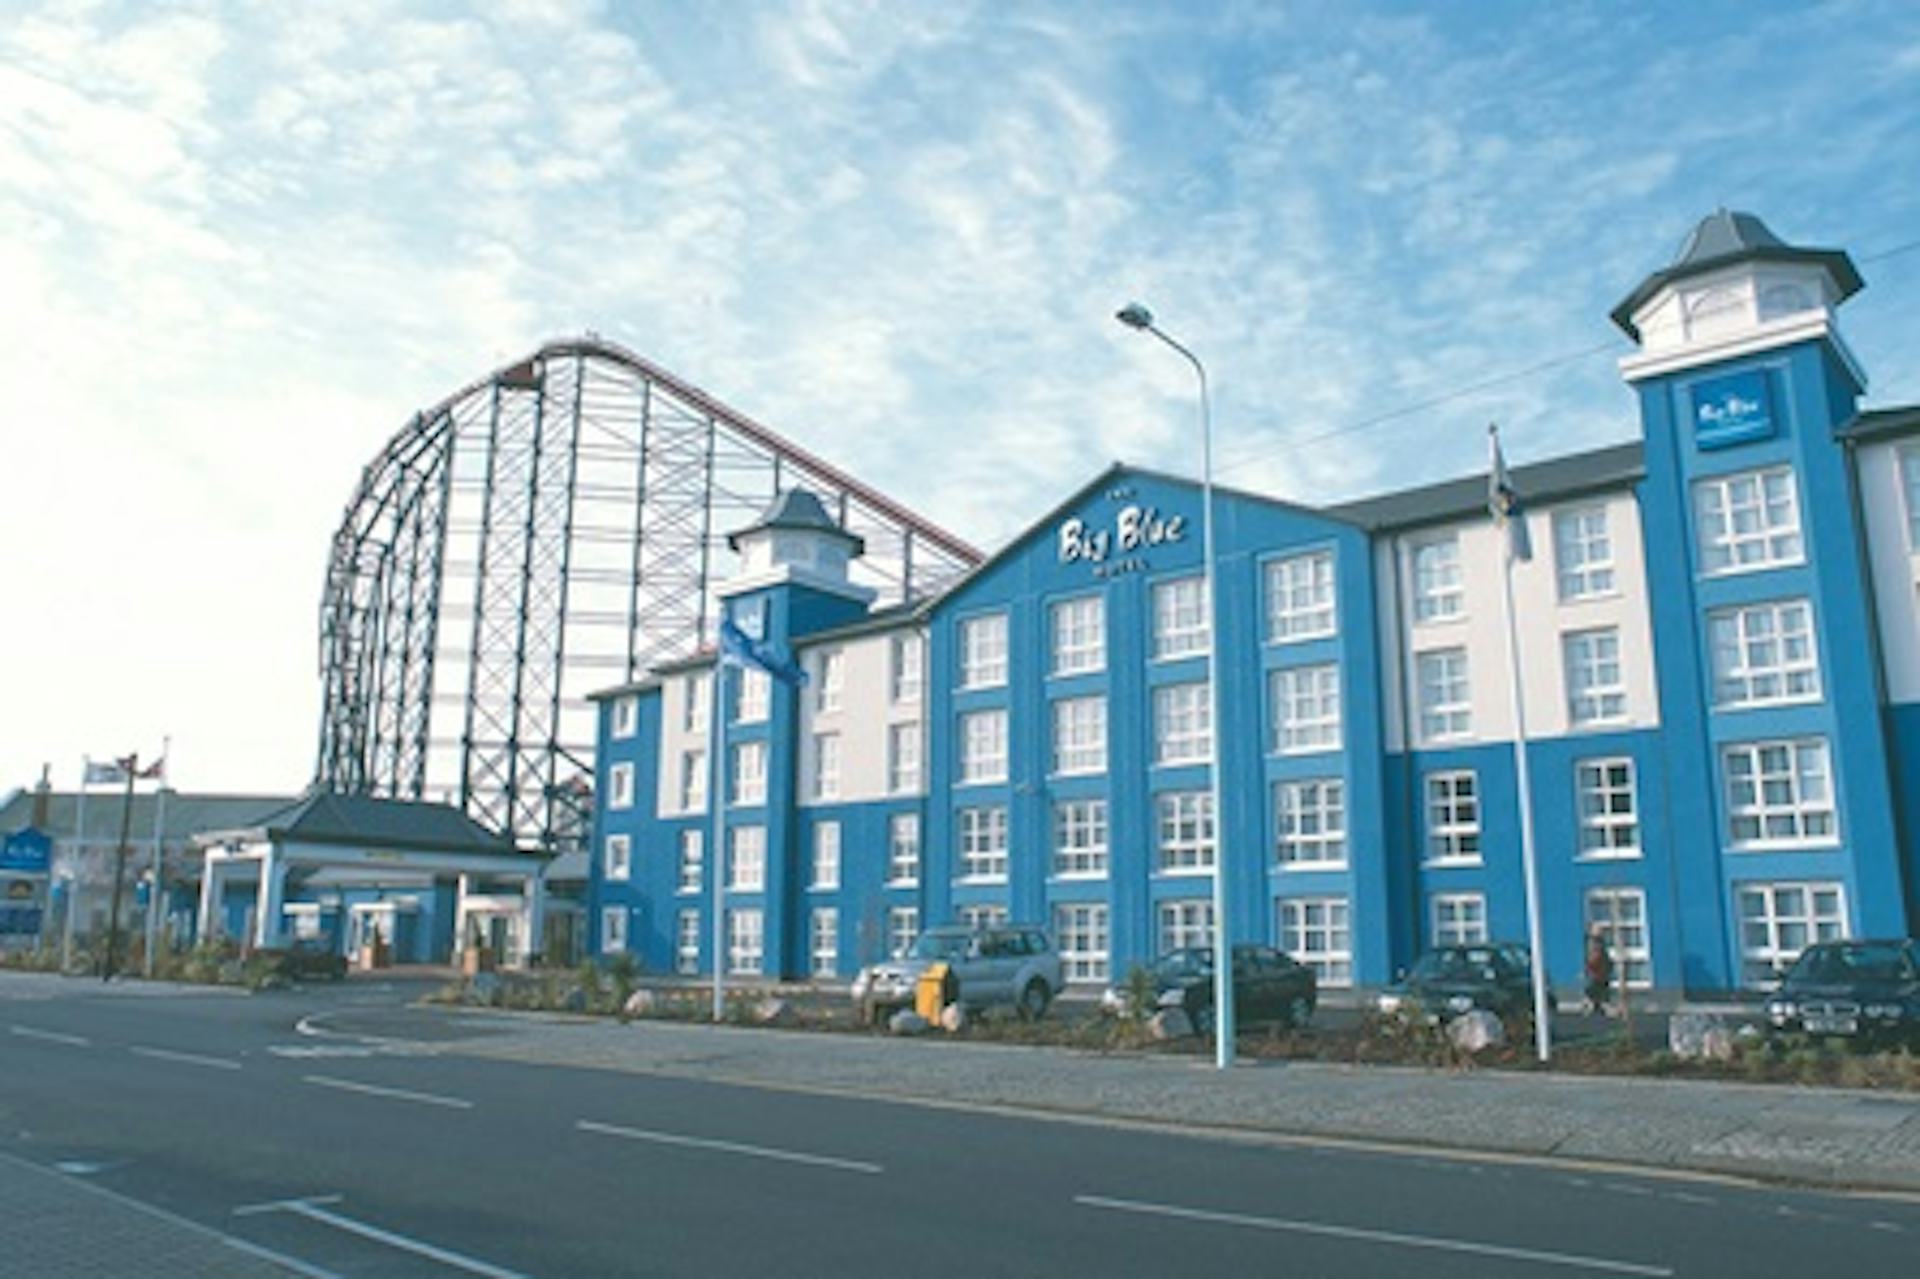 One Night Coastal Escape for Two at The Big Blue Hotel, Blackpool